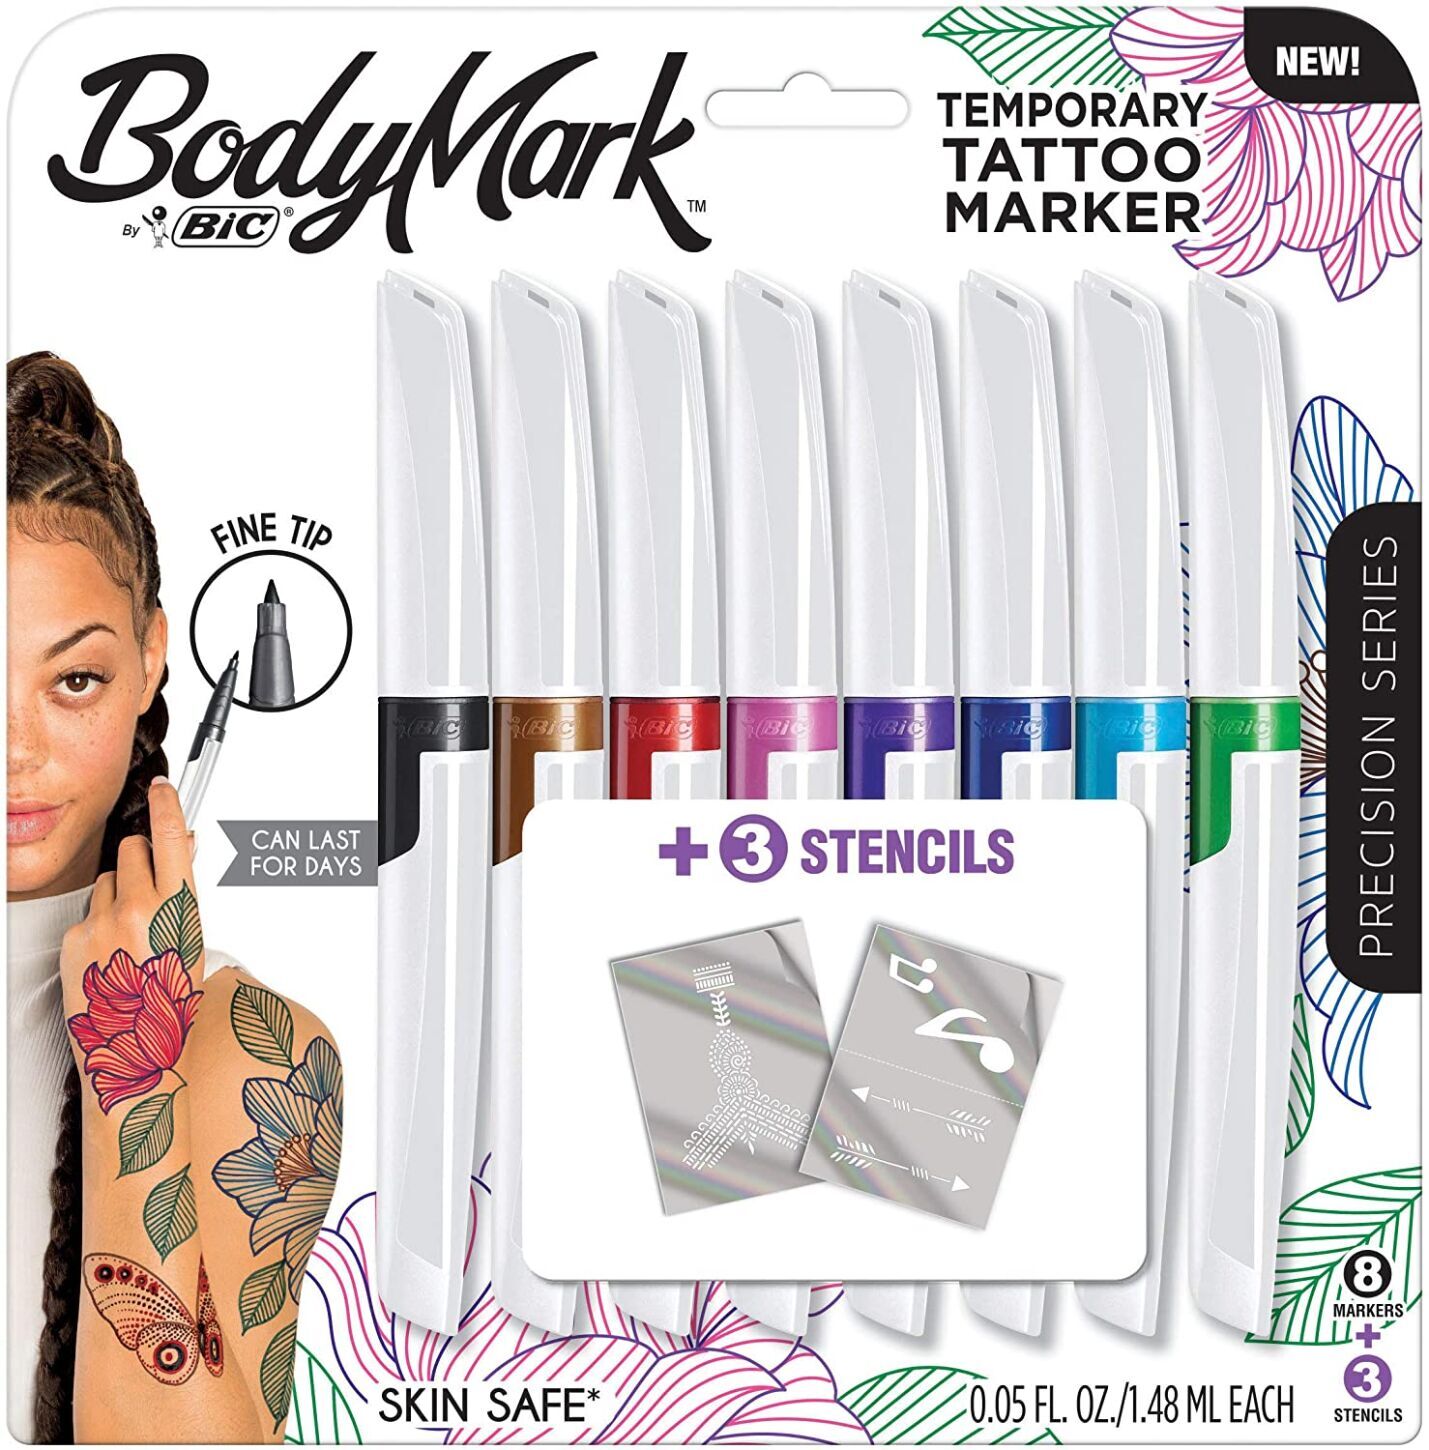 Bic Body Mark Temporary Tattoo Marker 3 pack  Randolph Community College  Campus Store